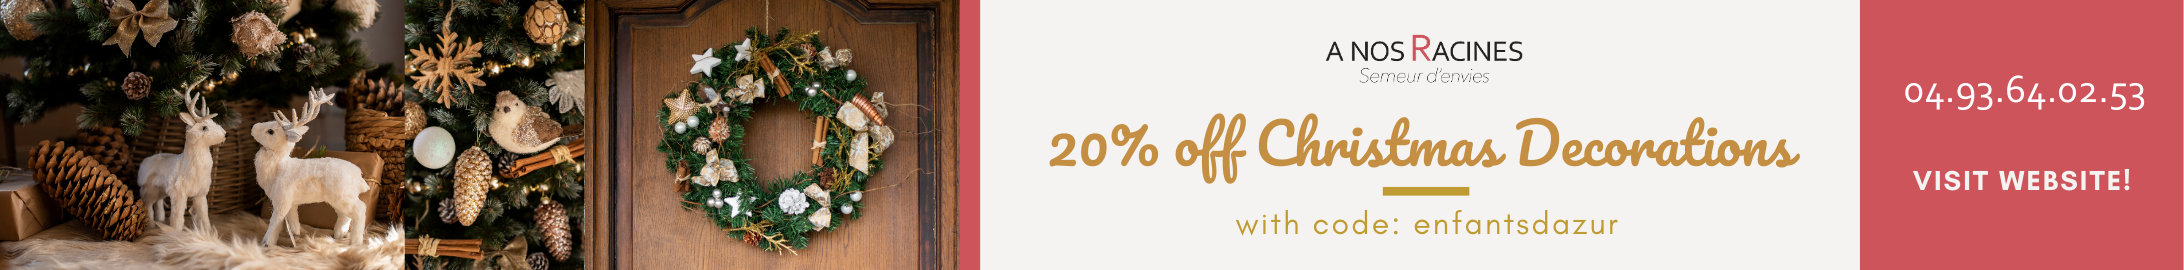 20% off Christmas Decorations